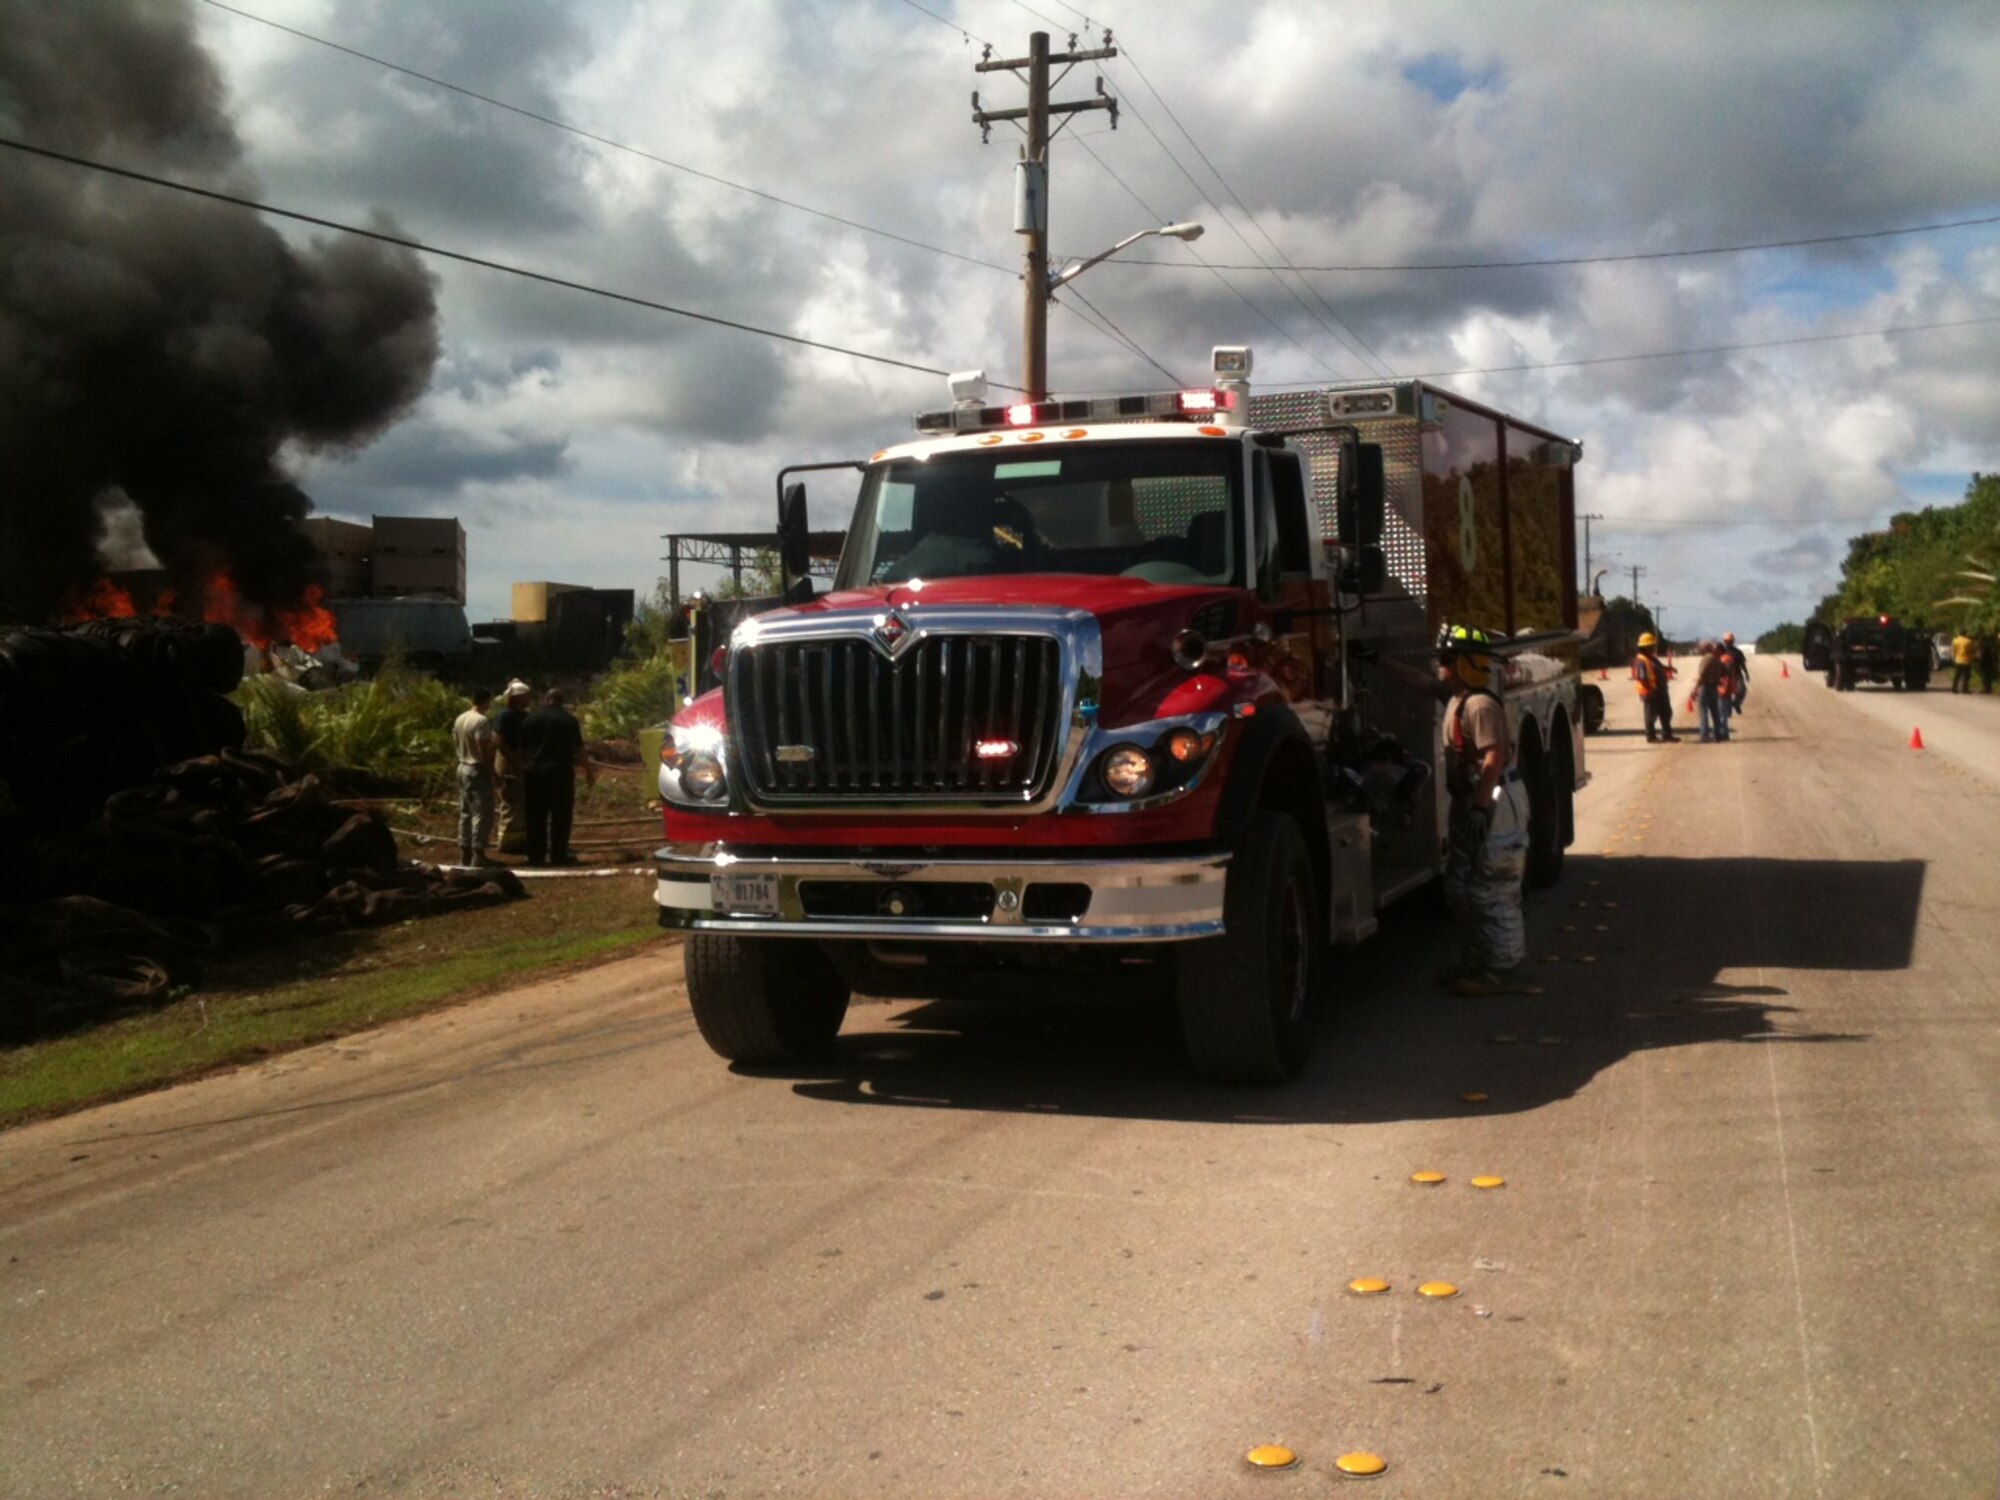 Dededo, Guam – The Andersen Fire Department assists the Guam Fire Department in fighting a fire located outside Andersen AFB  Sept. 17. The Andersen Fire Department assists and receives assistance from local first responders when the need arises. (U.S. Air Force courtesy photo/Released)